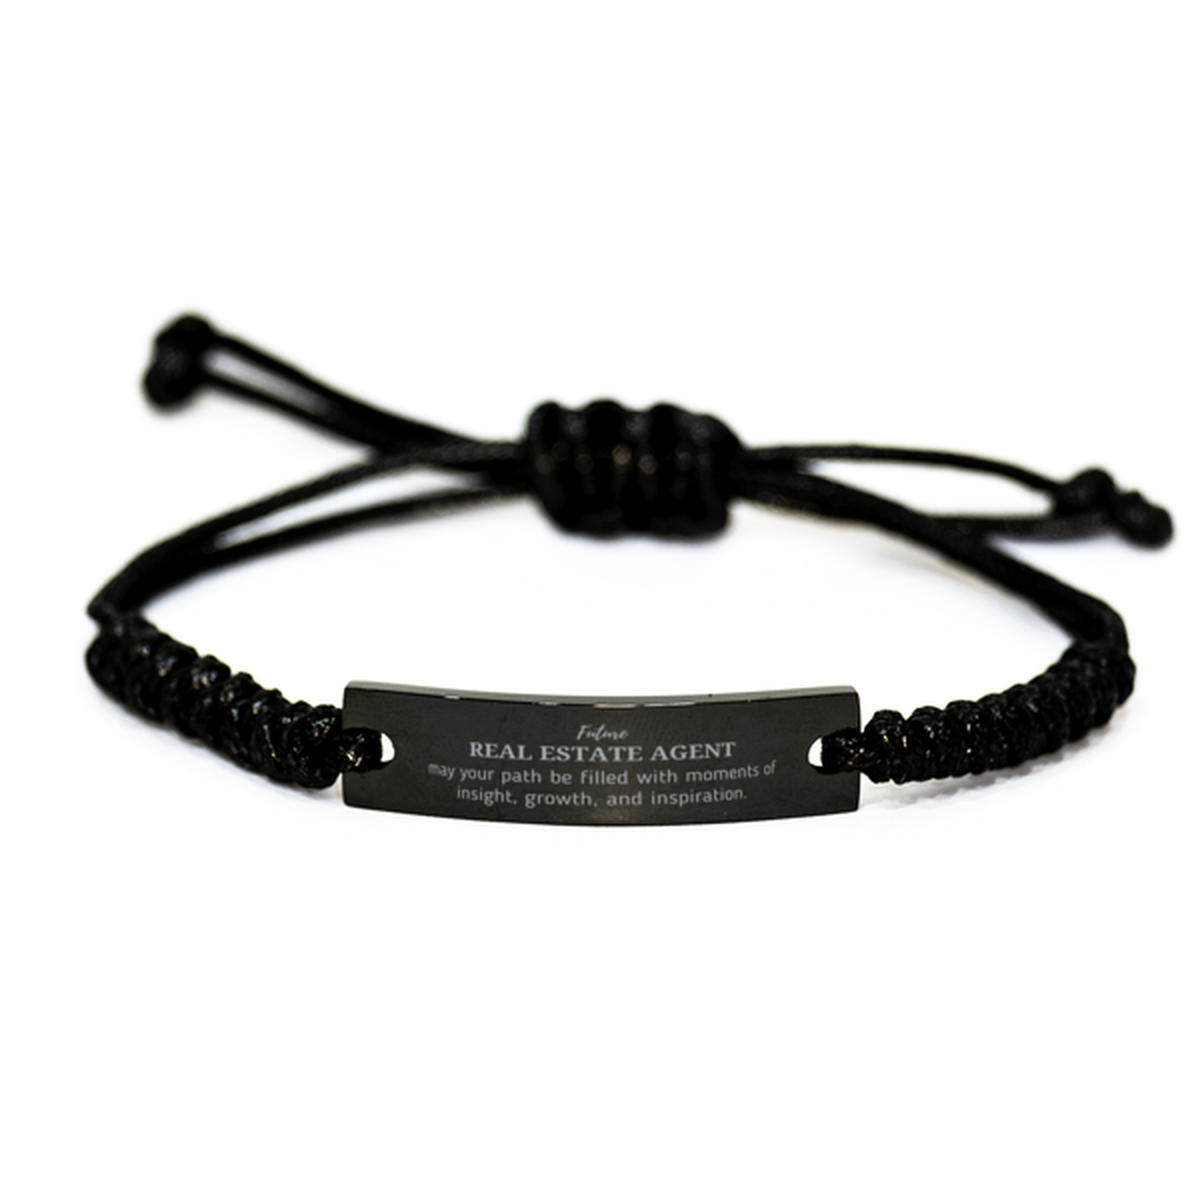 Future Real Estate Agent Gifts, May your path be filled with moments of insight, Graduation Gifts for New Real Estate Agent, Christmas Unique Black Rope Bracelet For Men, Women, Friends